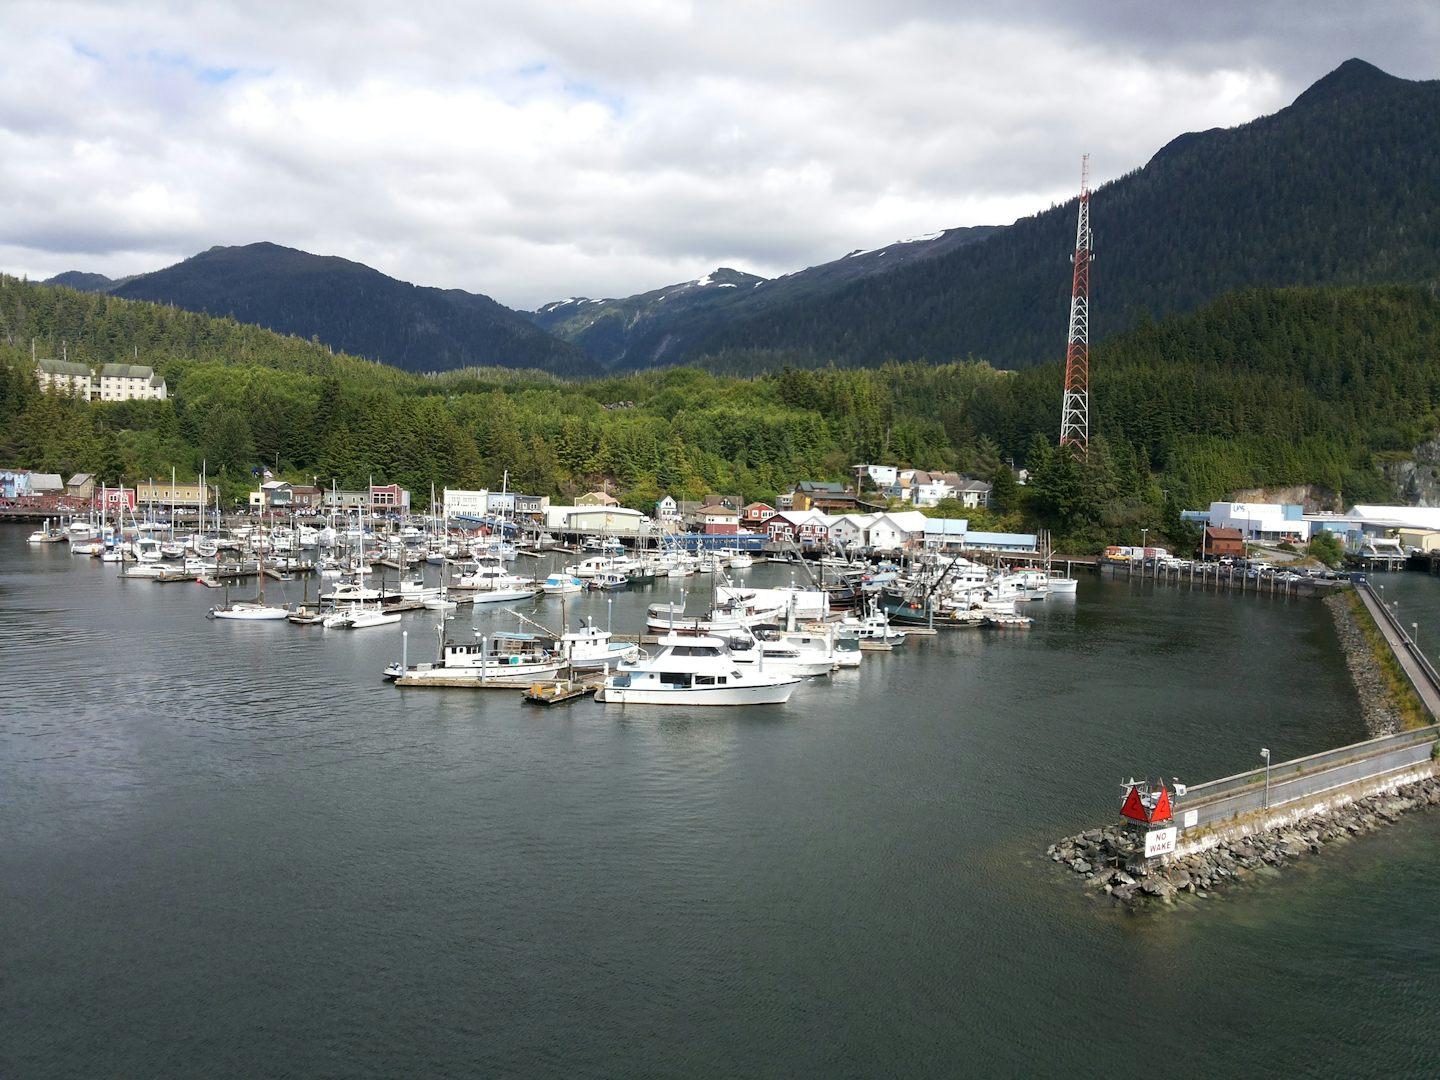 In port at Juneau